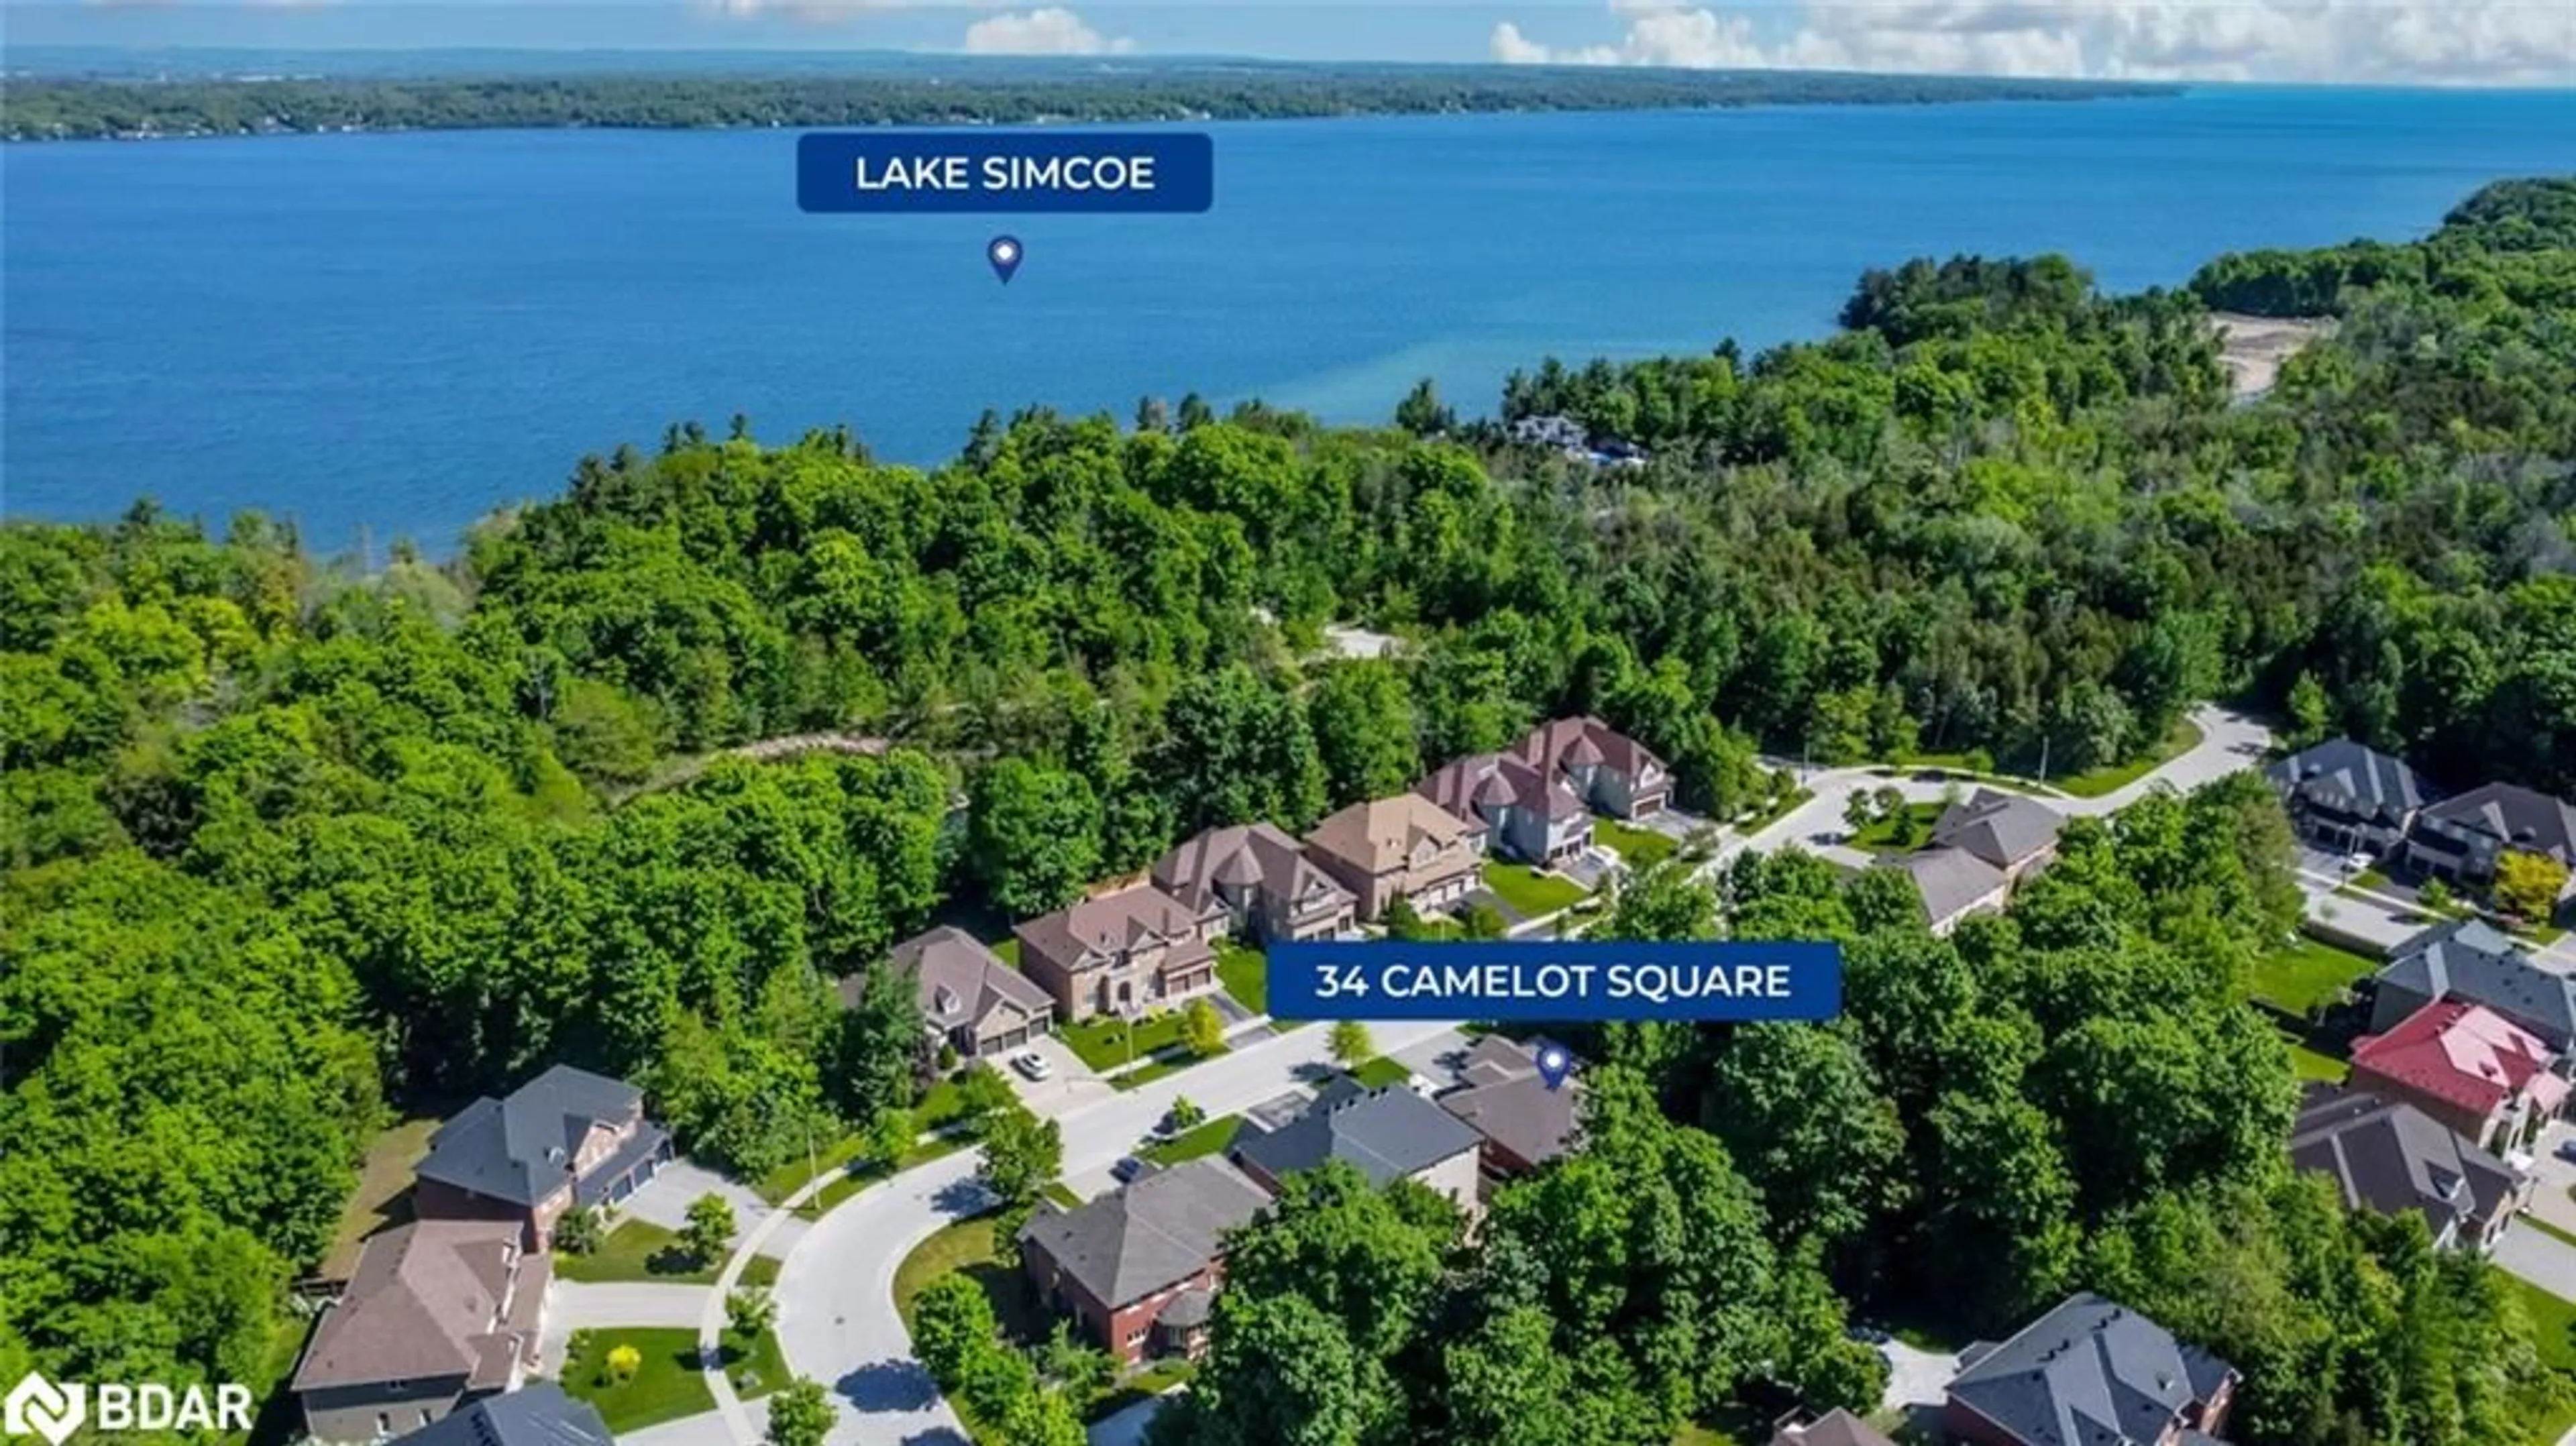 Lakeview for 34 Camelot Sq, Barrie Ontario L4M 0C3